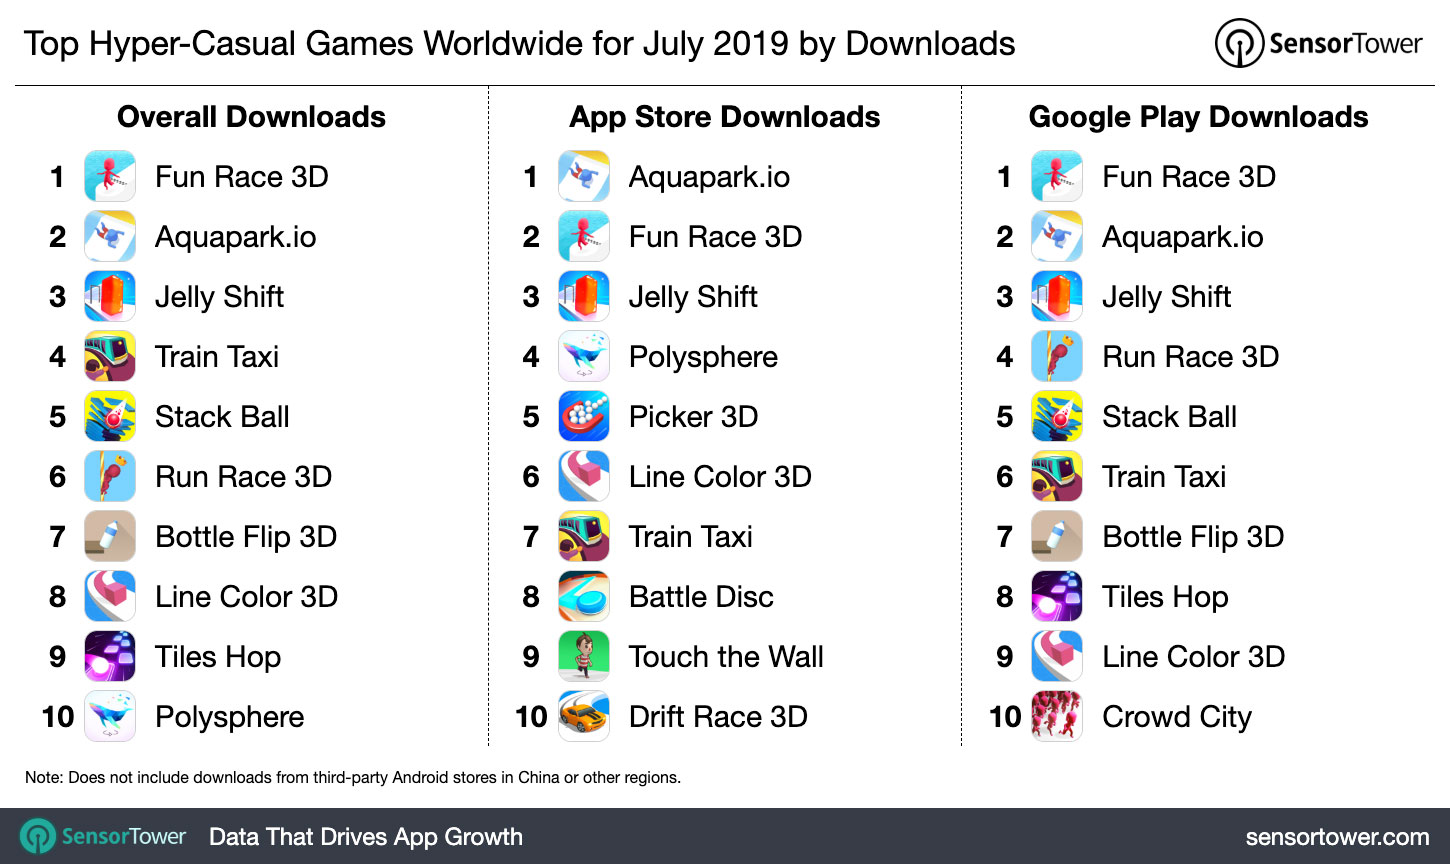 Top Hyper-Casual Games Worldwide for July 2019 by Downloads